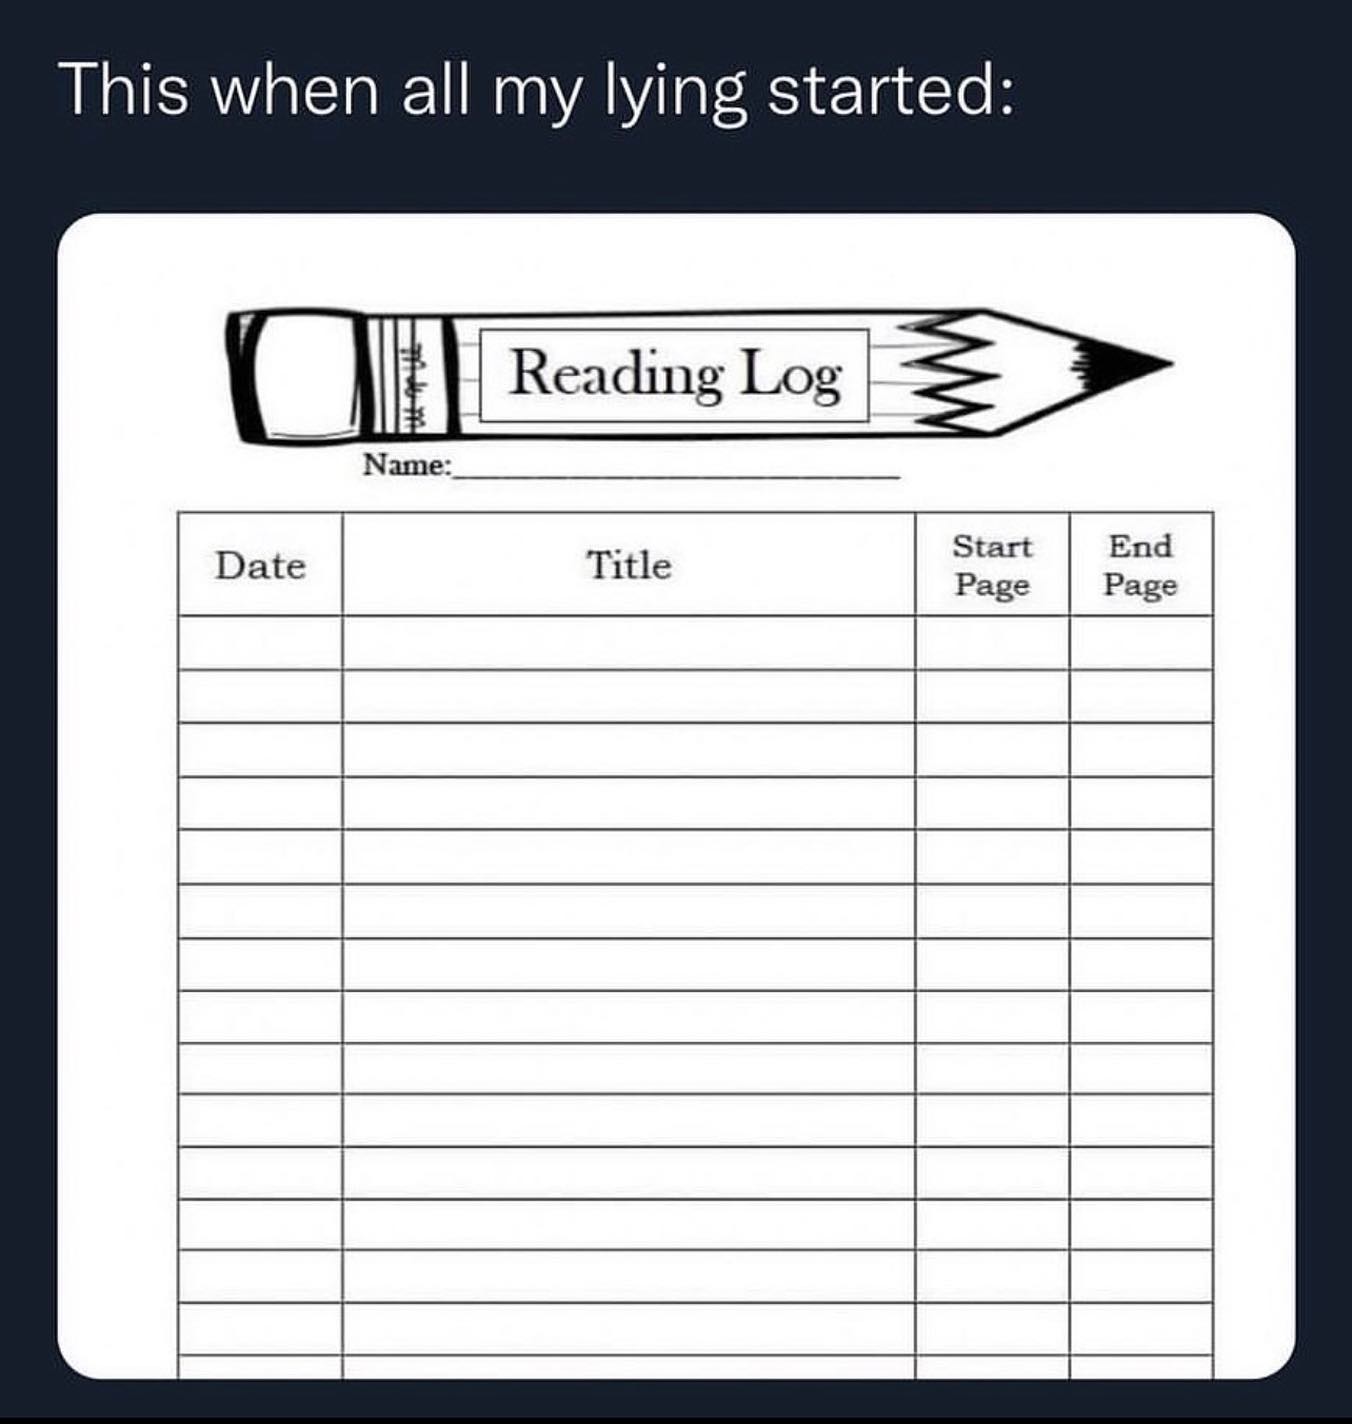 monday morning randomness - lying first started - This when all my lying started Date Name Reading Log Title Start Page End Page